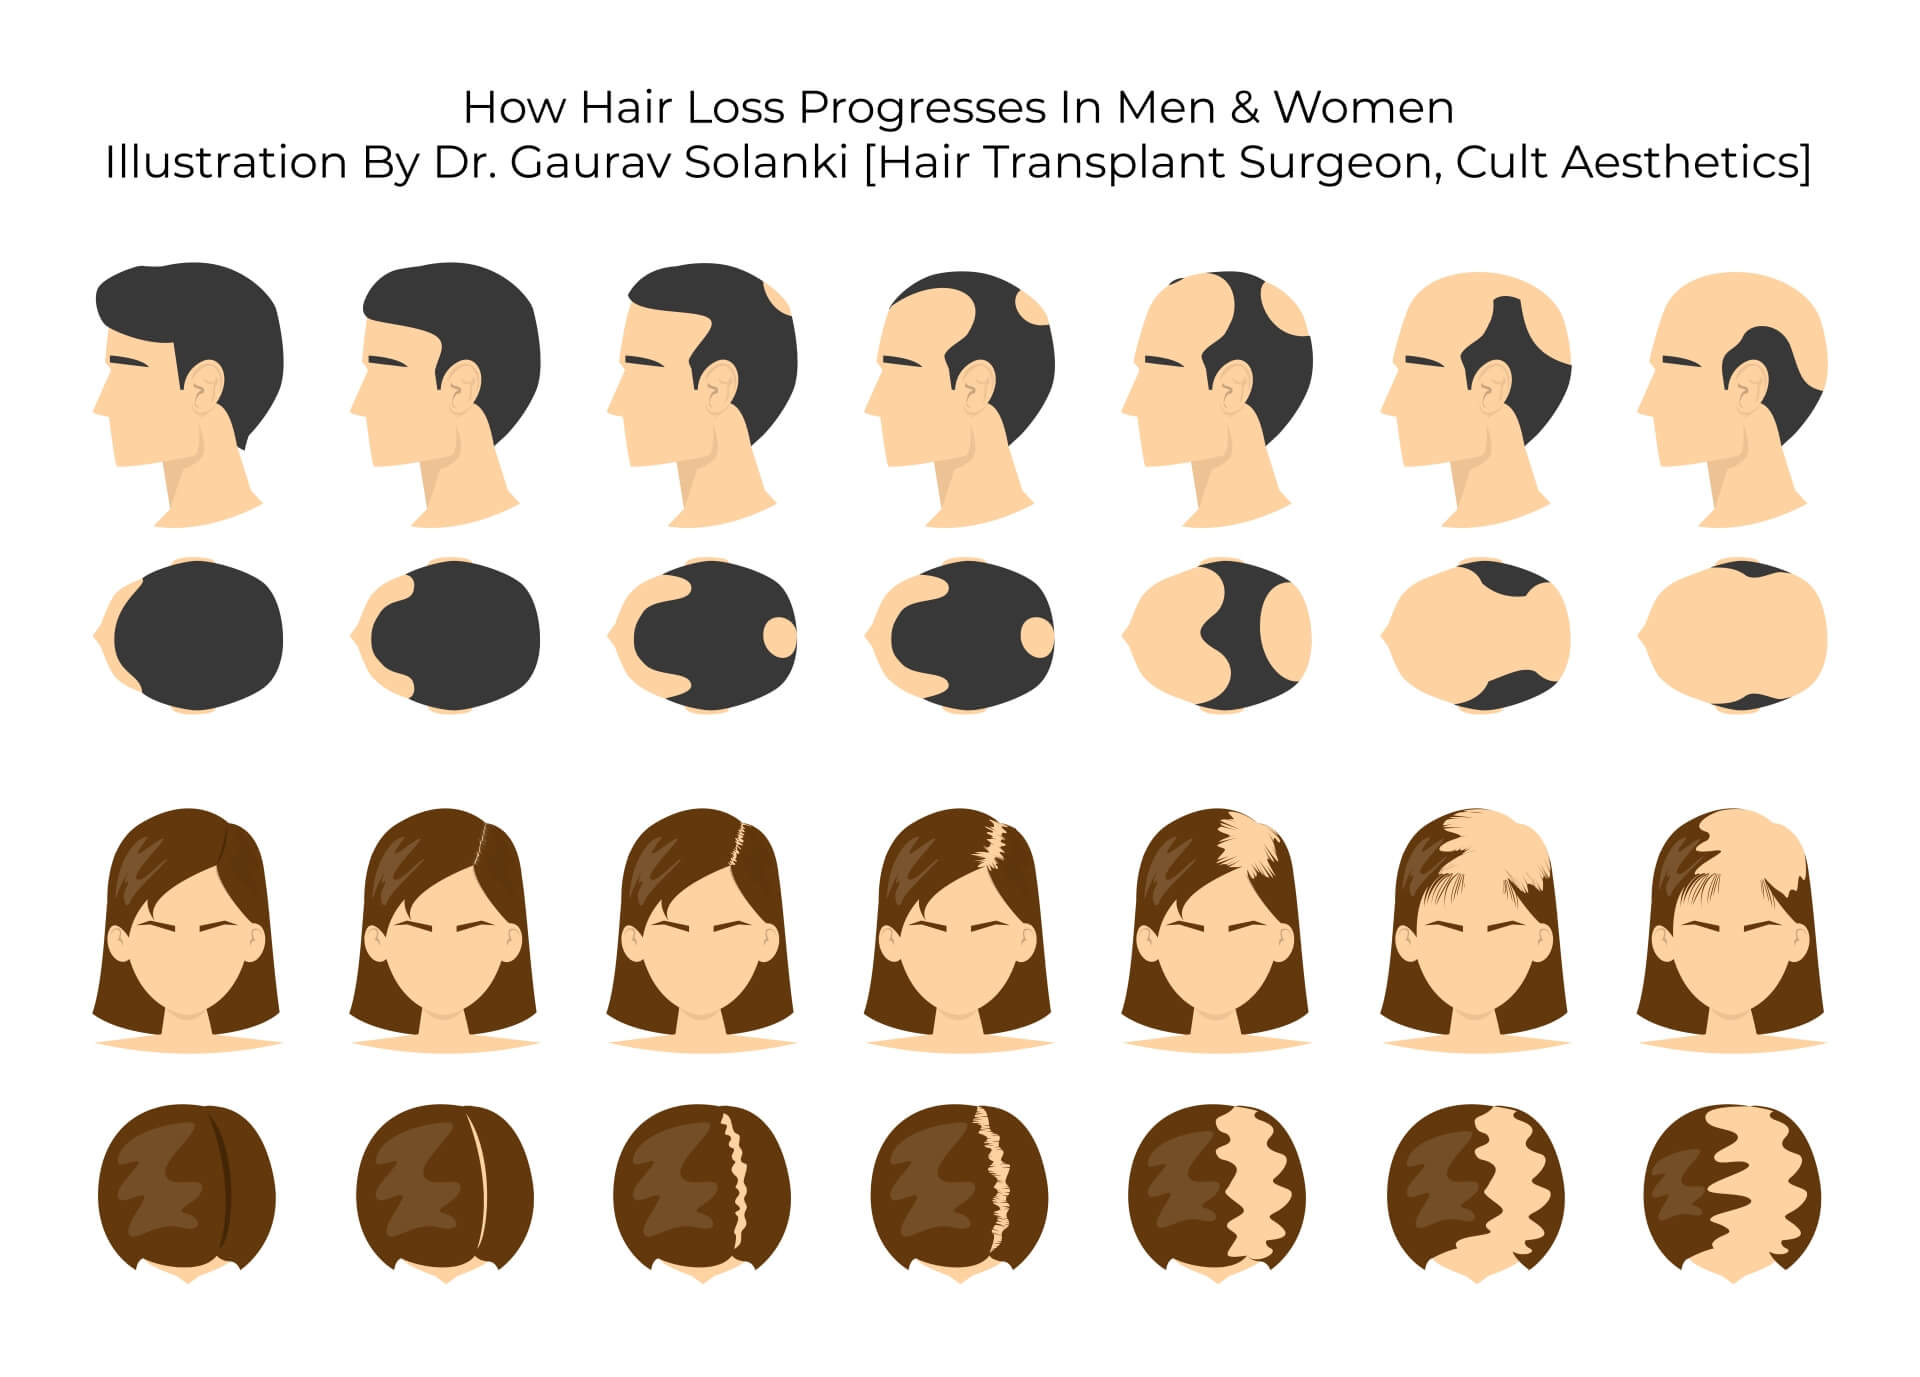 Hair Loss Progression in Men and Women